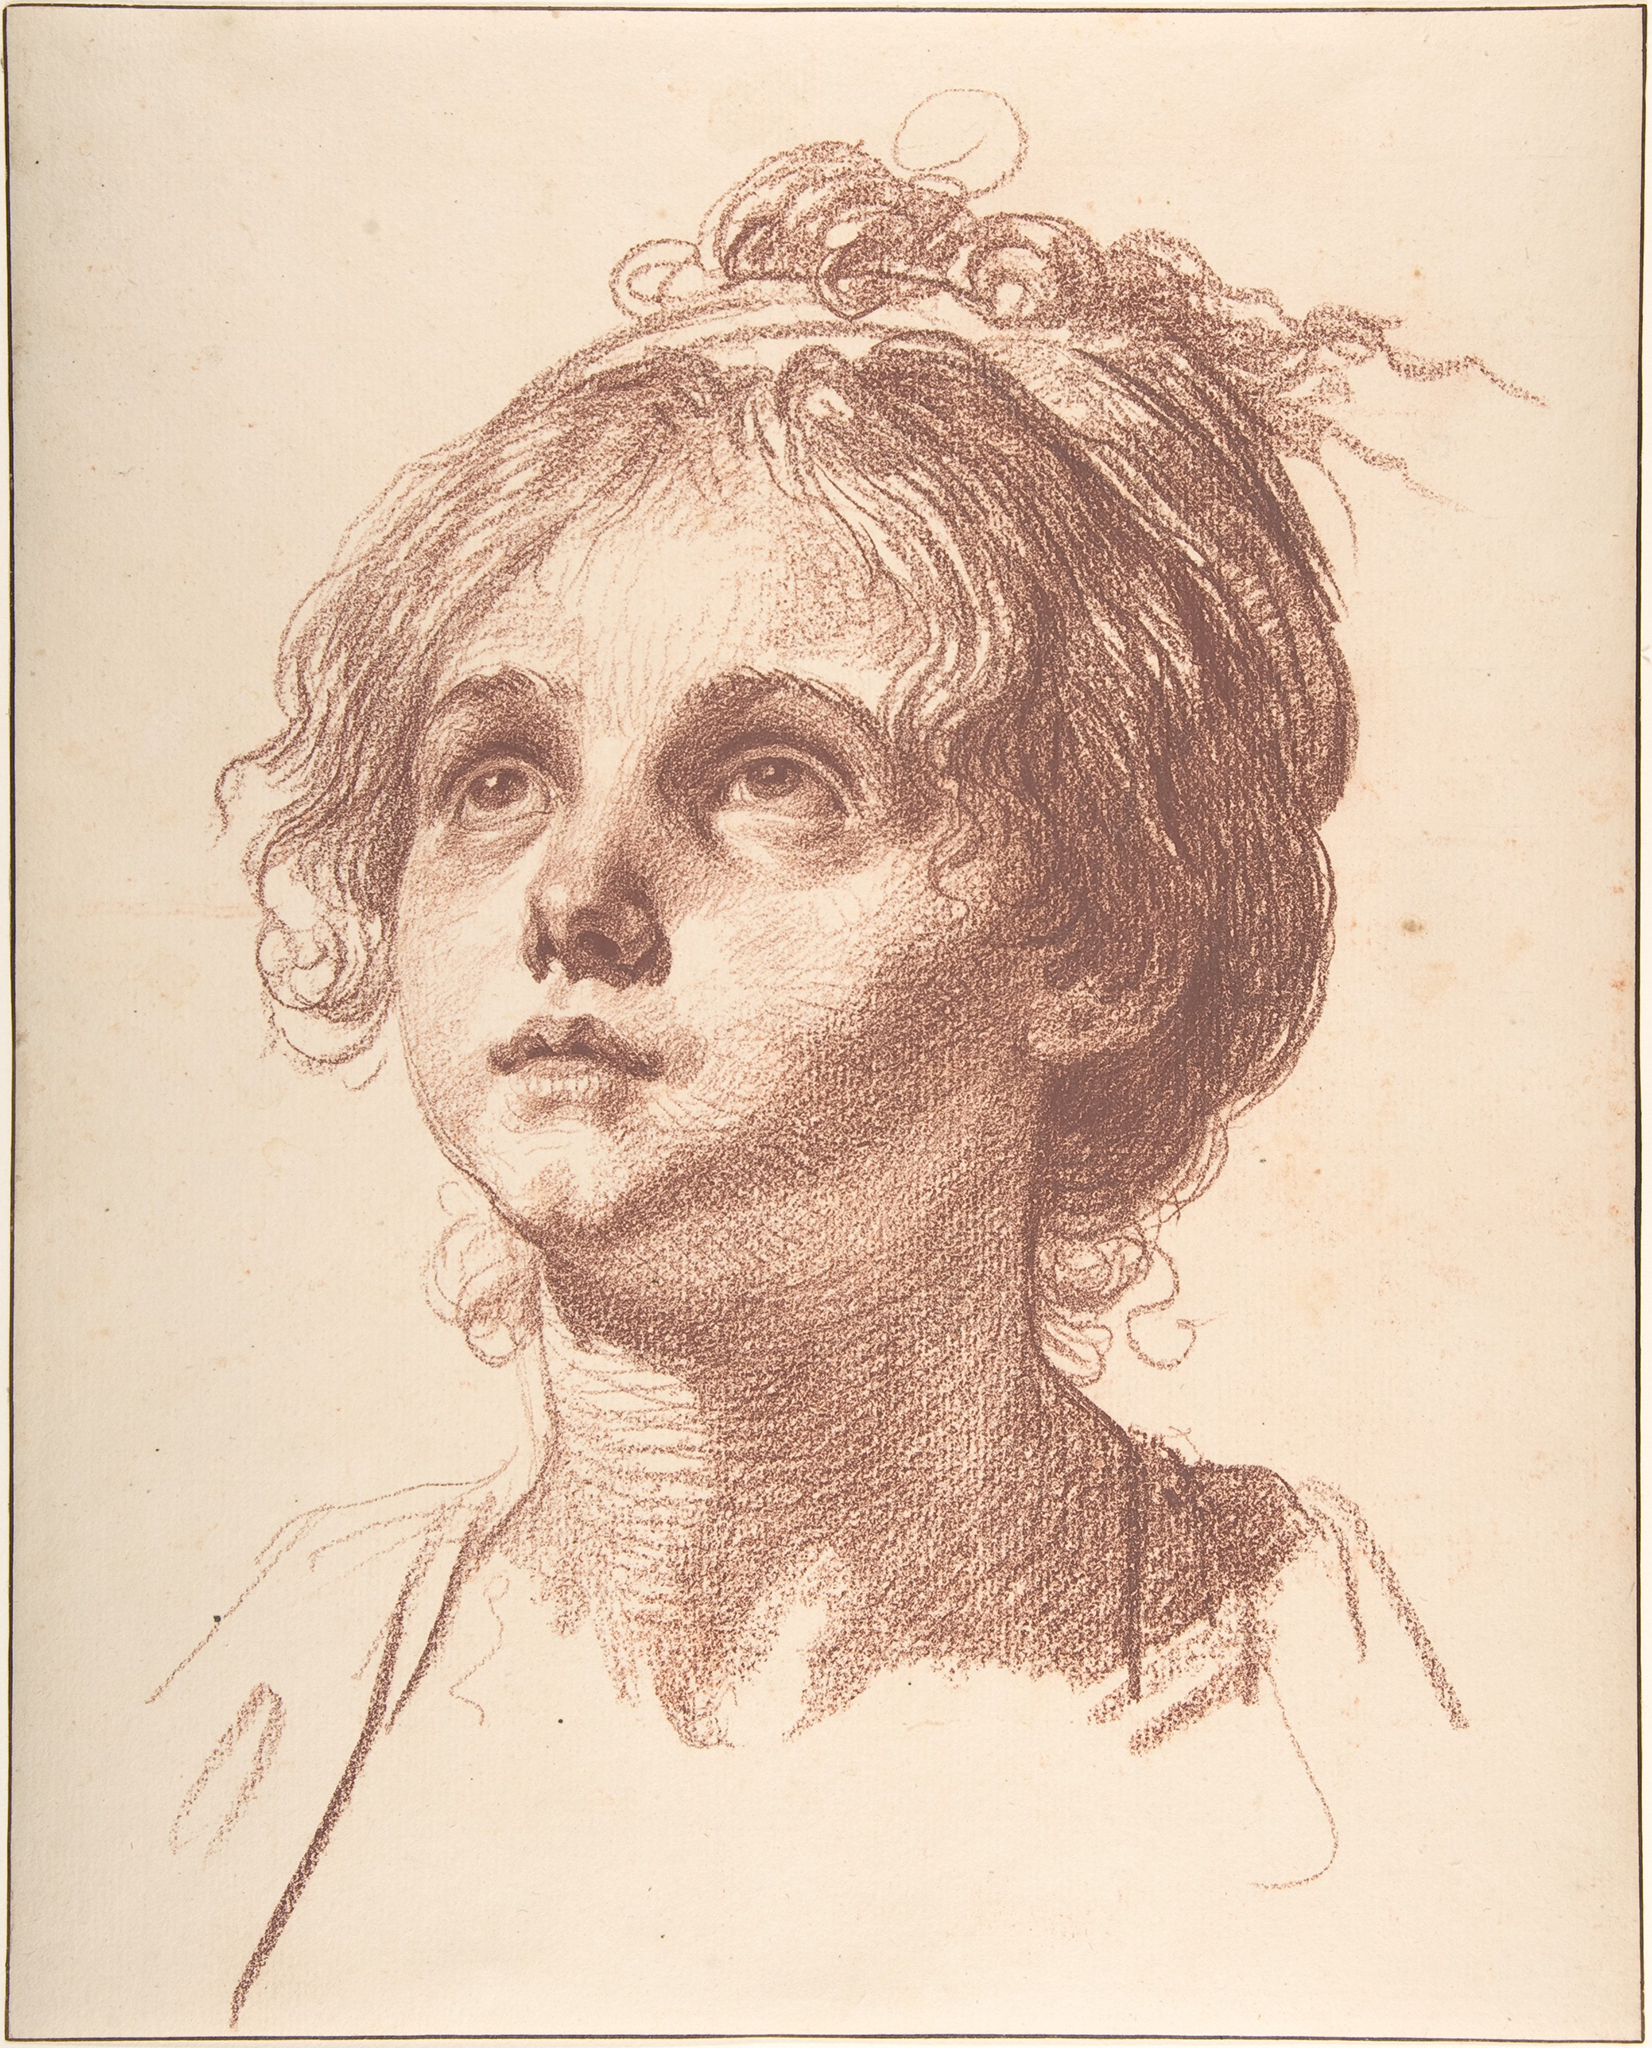 A sketch of the head of a girl. She has wavy hair that is wrapped by a tie or ribbon. Her both of her eyes are looking up. She is made up with red chalk and the lower half of her chest is left unfinished.